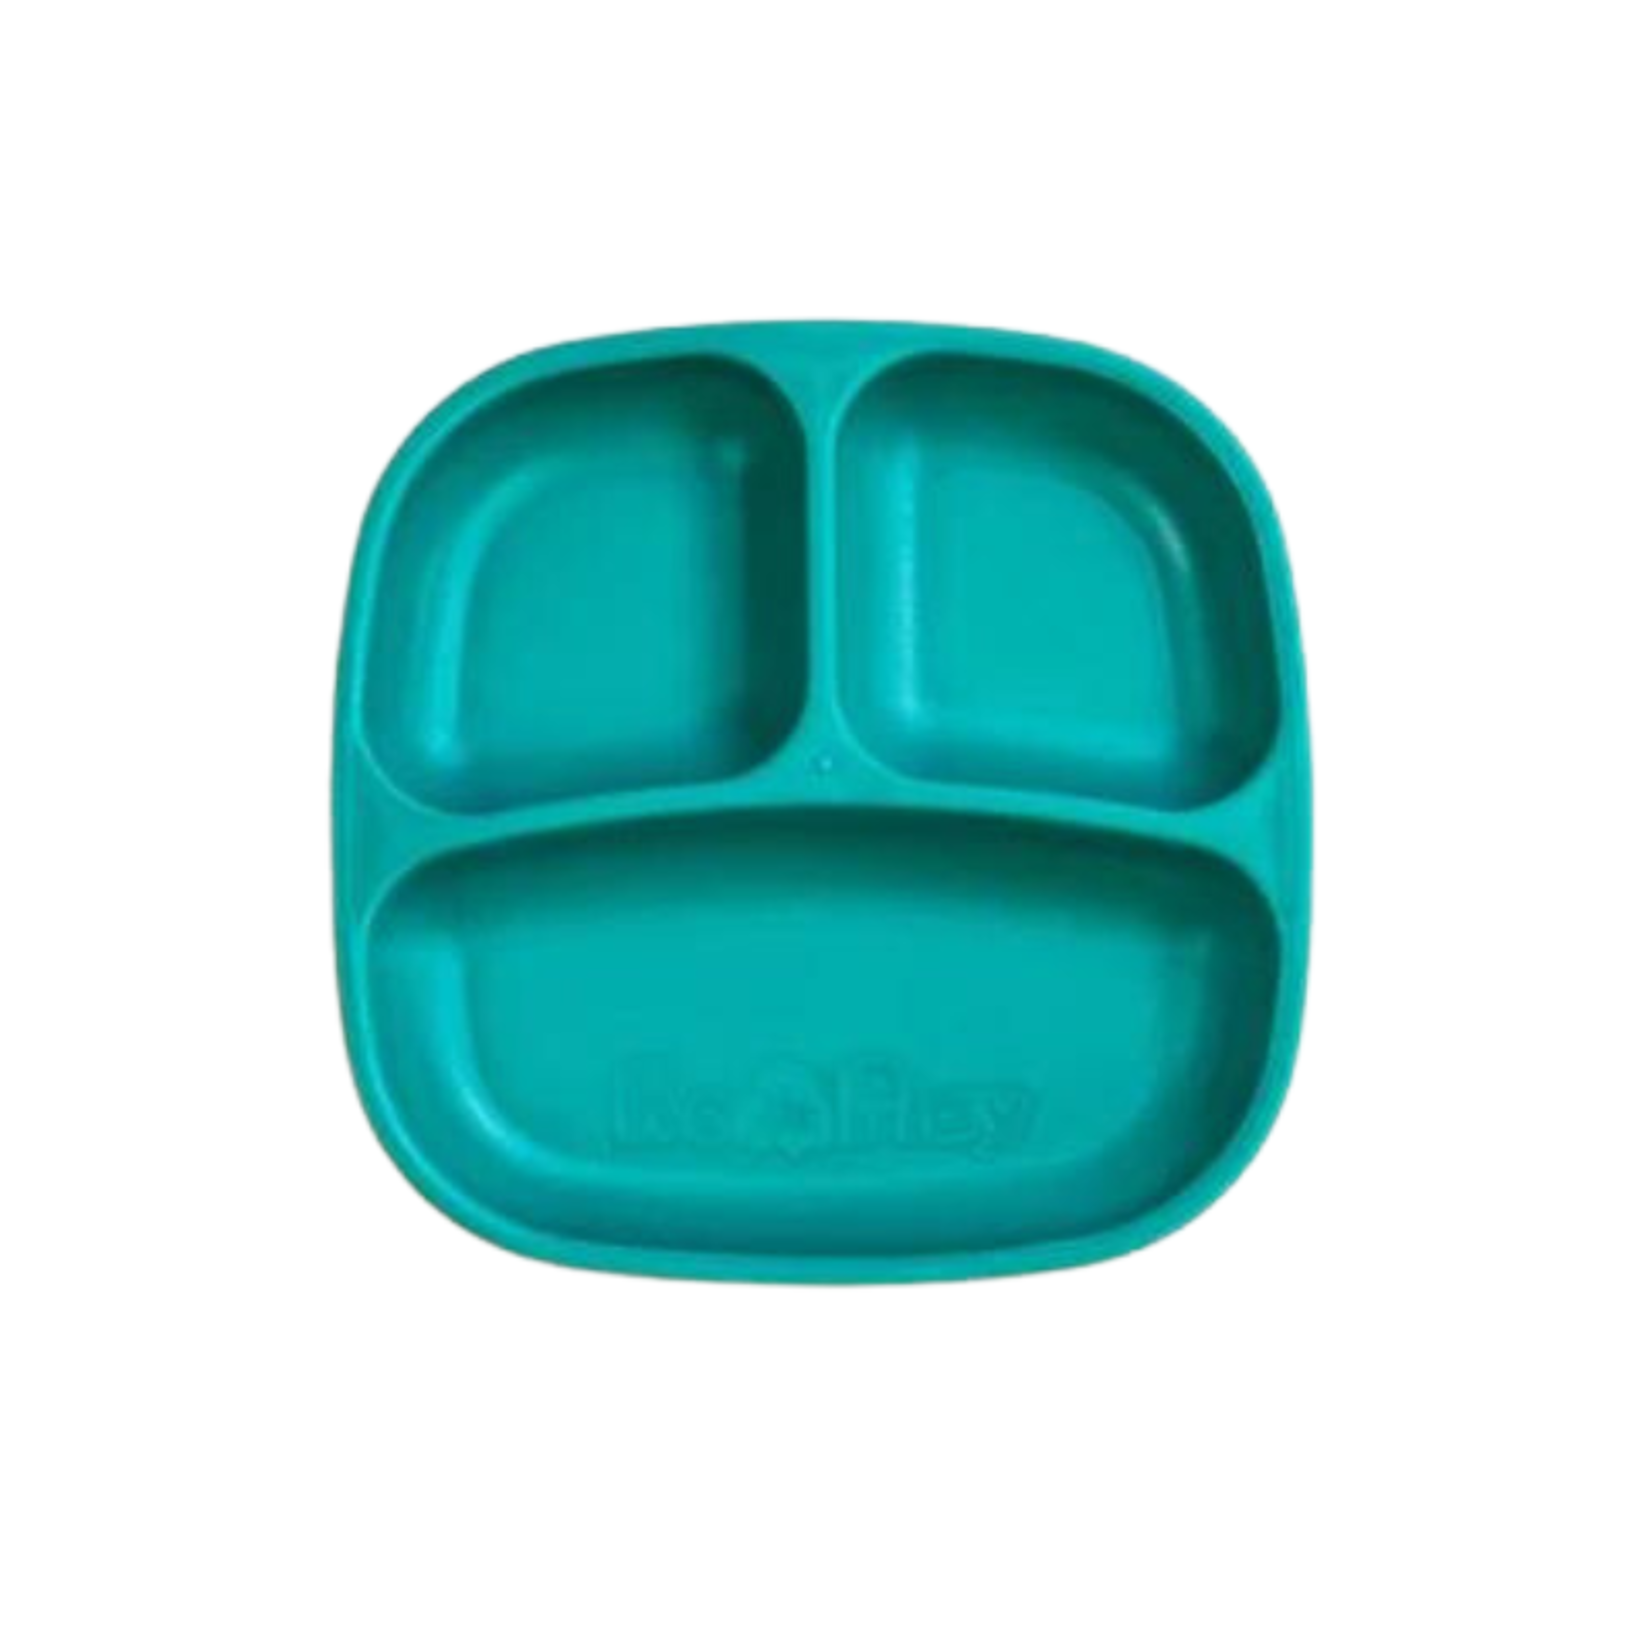 Replay Replay Divided Plates Teal